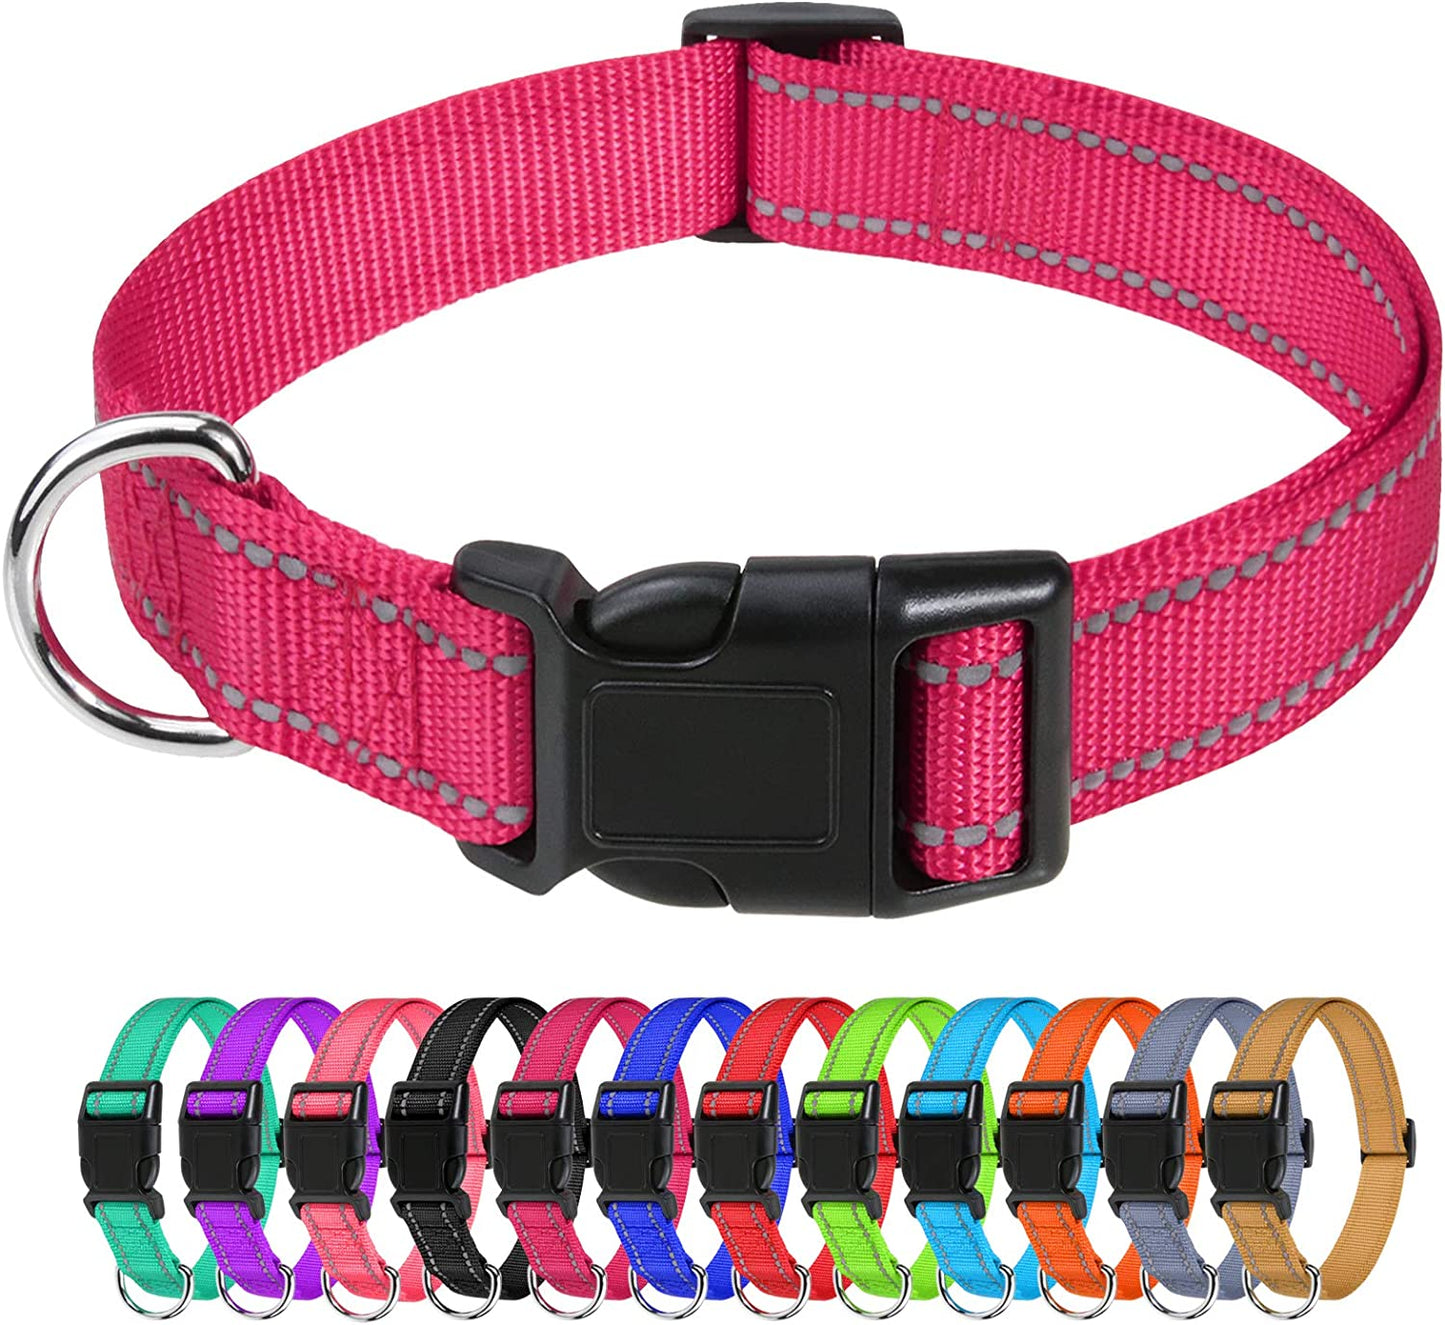 Reflective Nylon Dog Collars, Adjustable Classic Dog Collar with Quick Release Buckle for Small Dogs, Hot Pink, 5/8" Width